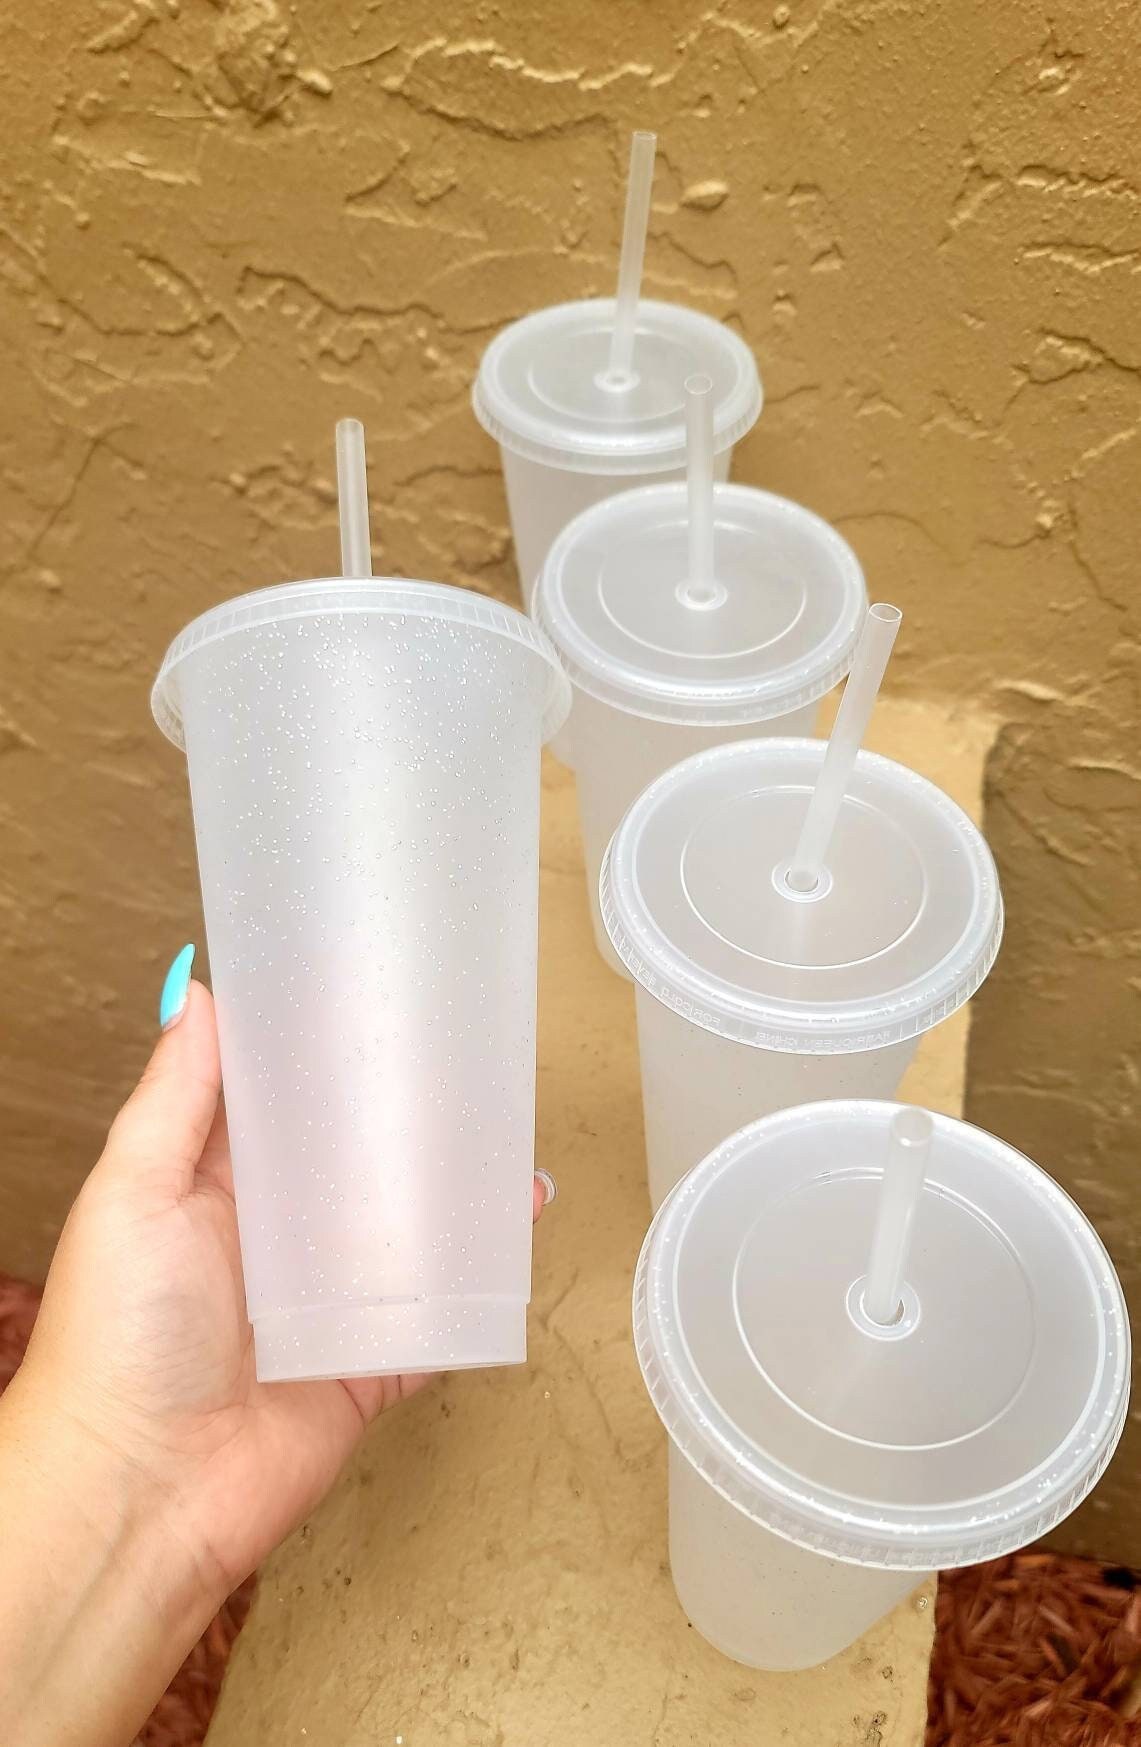 12 Pieces Reusable Cups with Lids and Straws 24 oz Glitter Iced